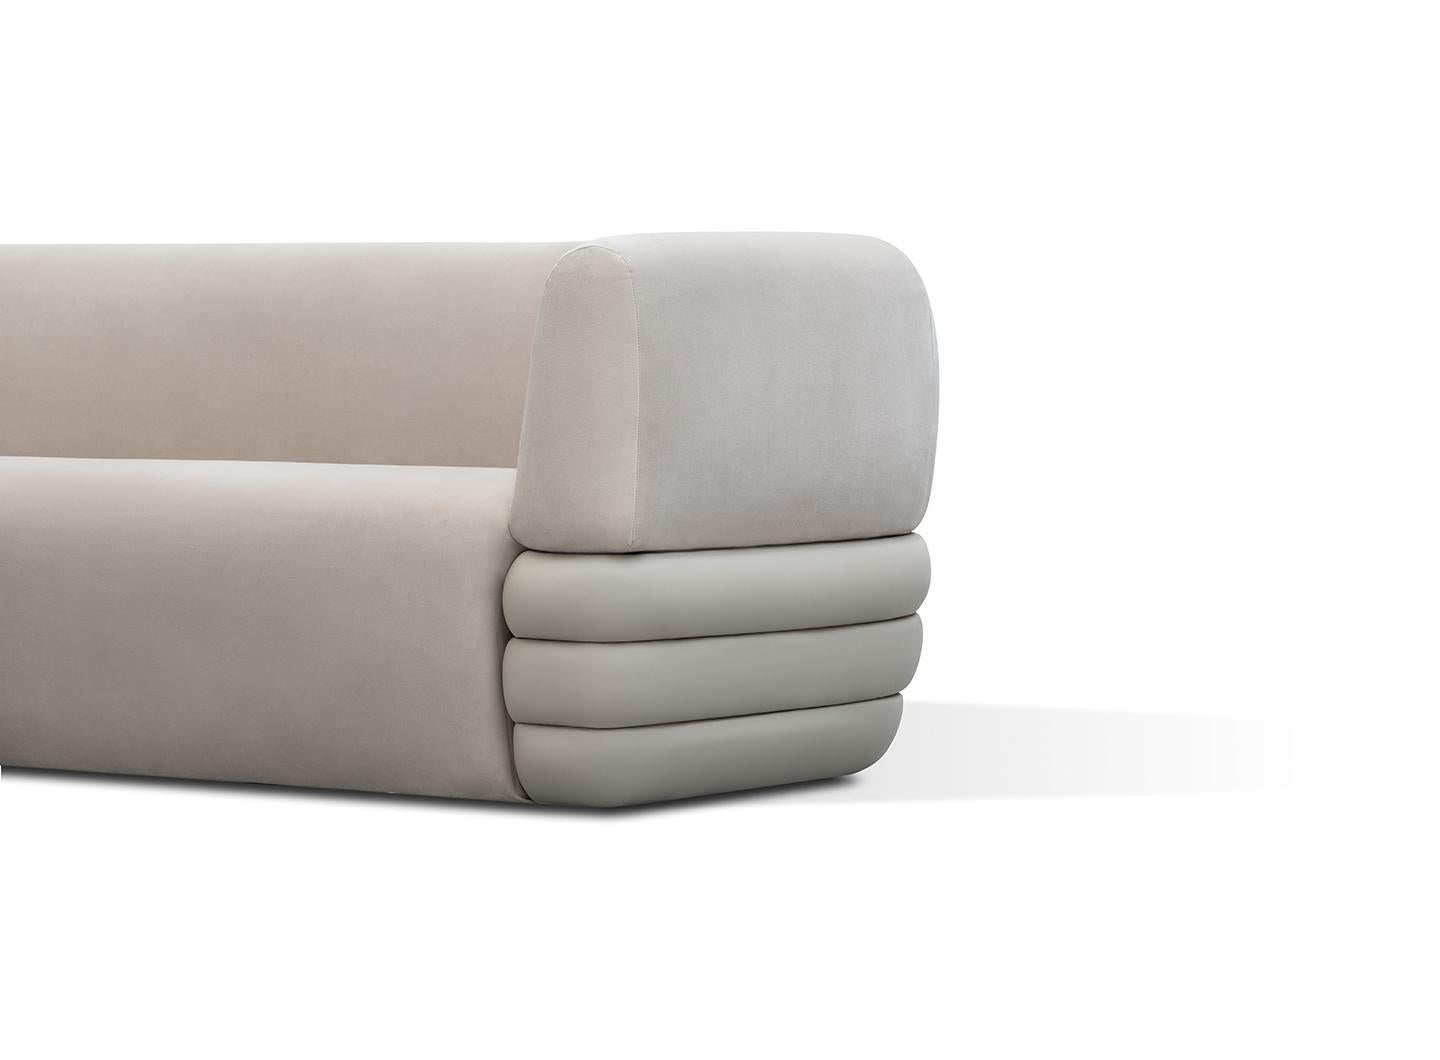 21st Century Carpanese Home Italia Upholstered Sofa Modern, Splendor 3p In New Condition For Sale In Sanguinetto, IT